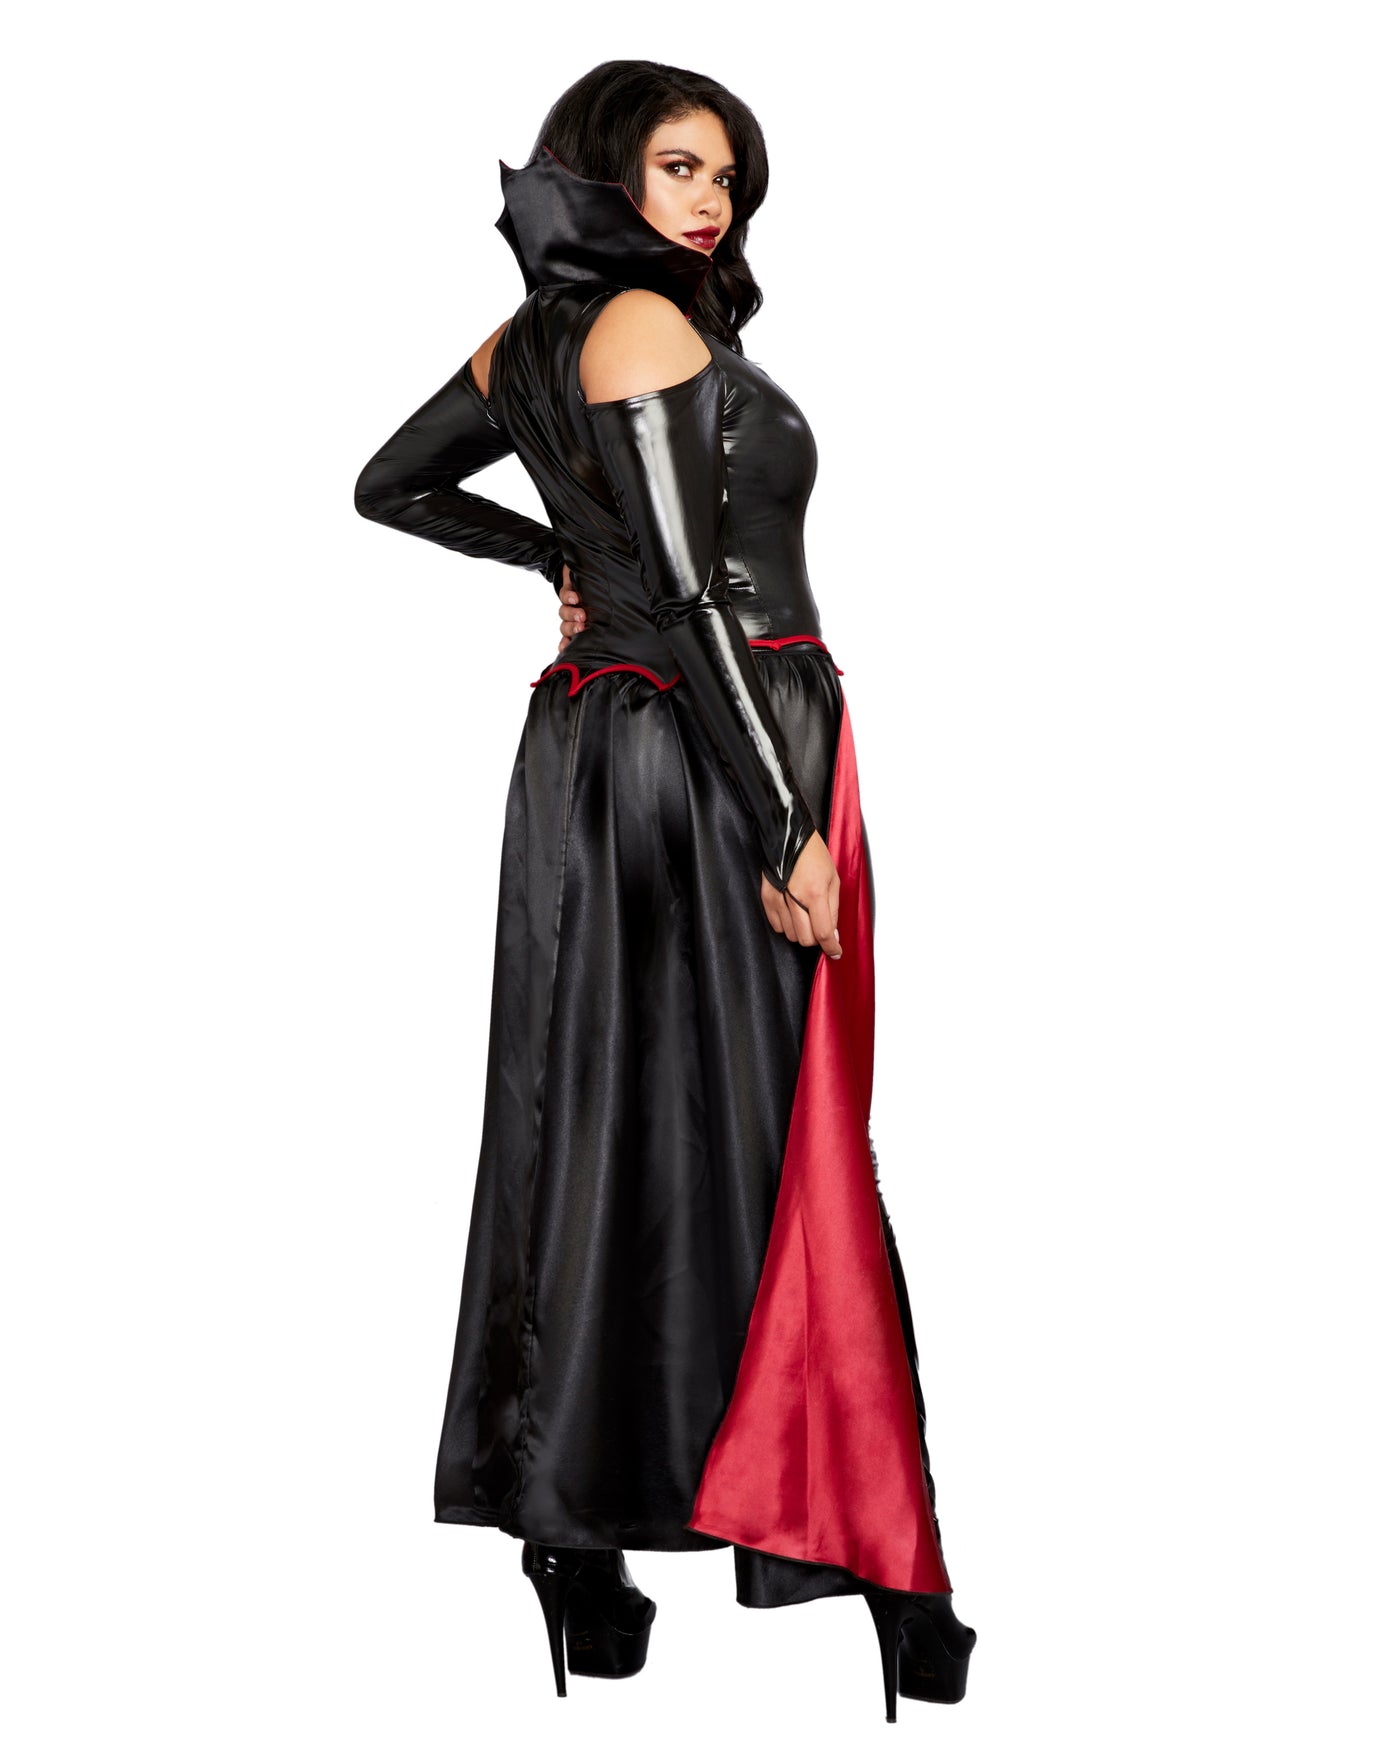 Plus Size Princess Of Darkness – Dreamgirl Costume